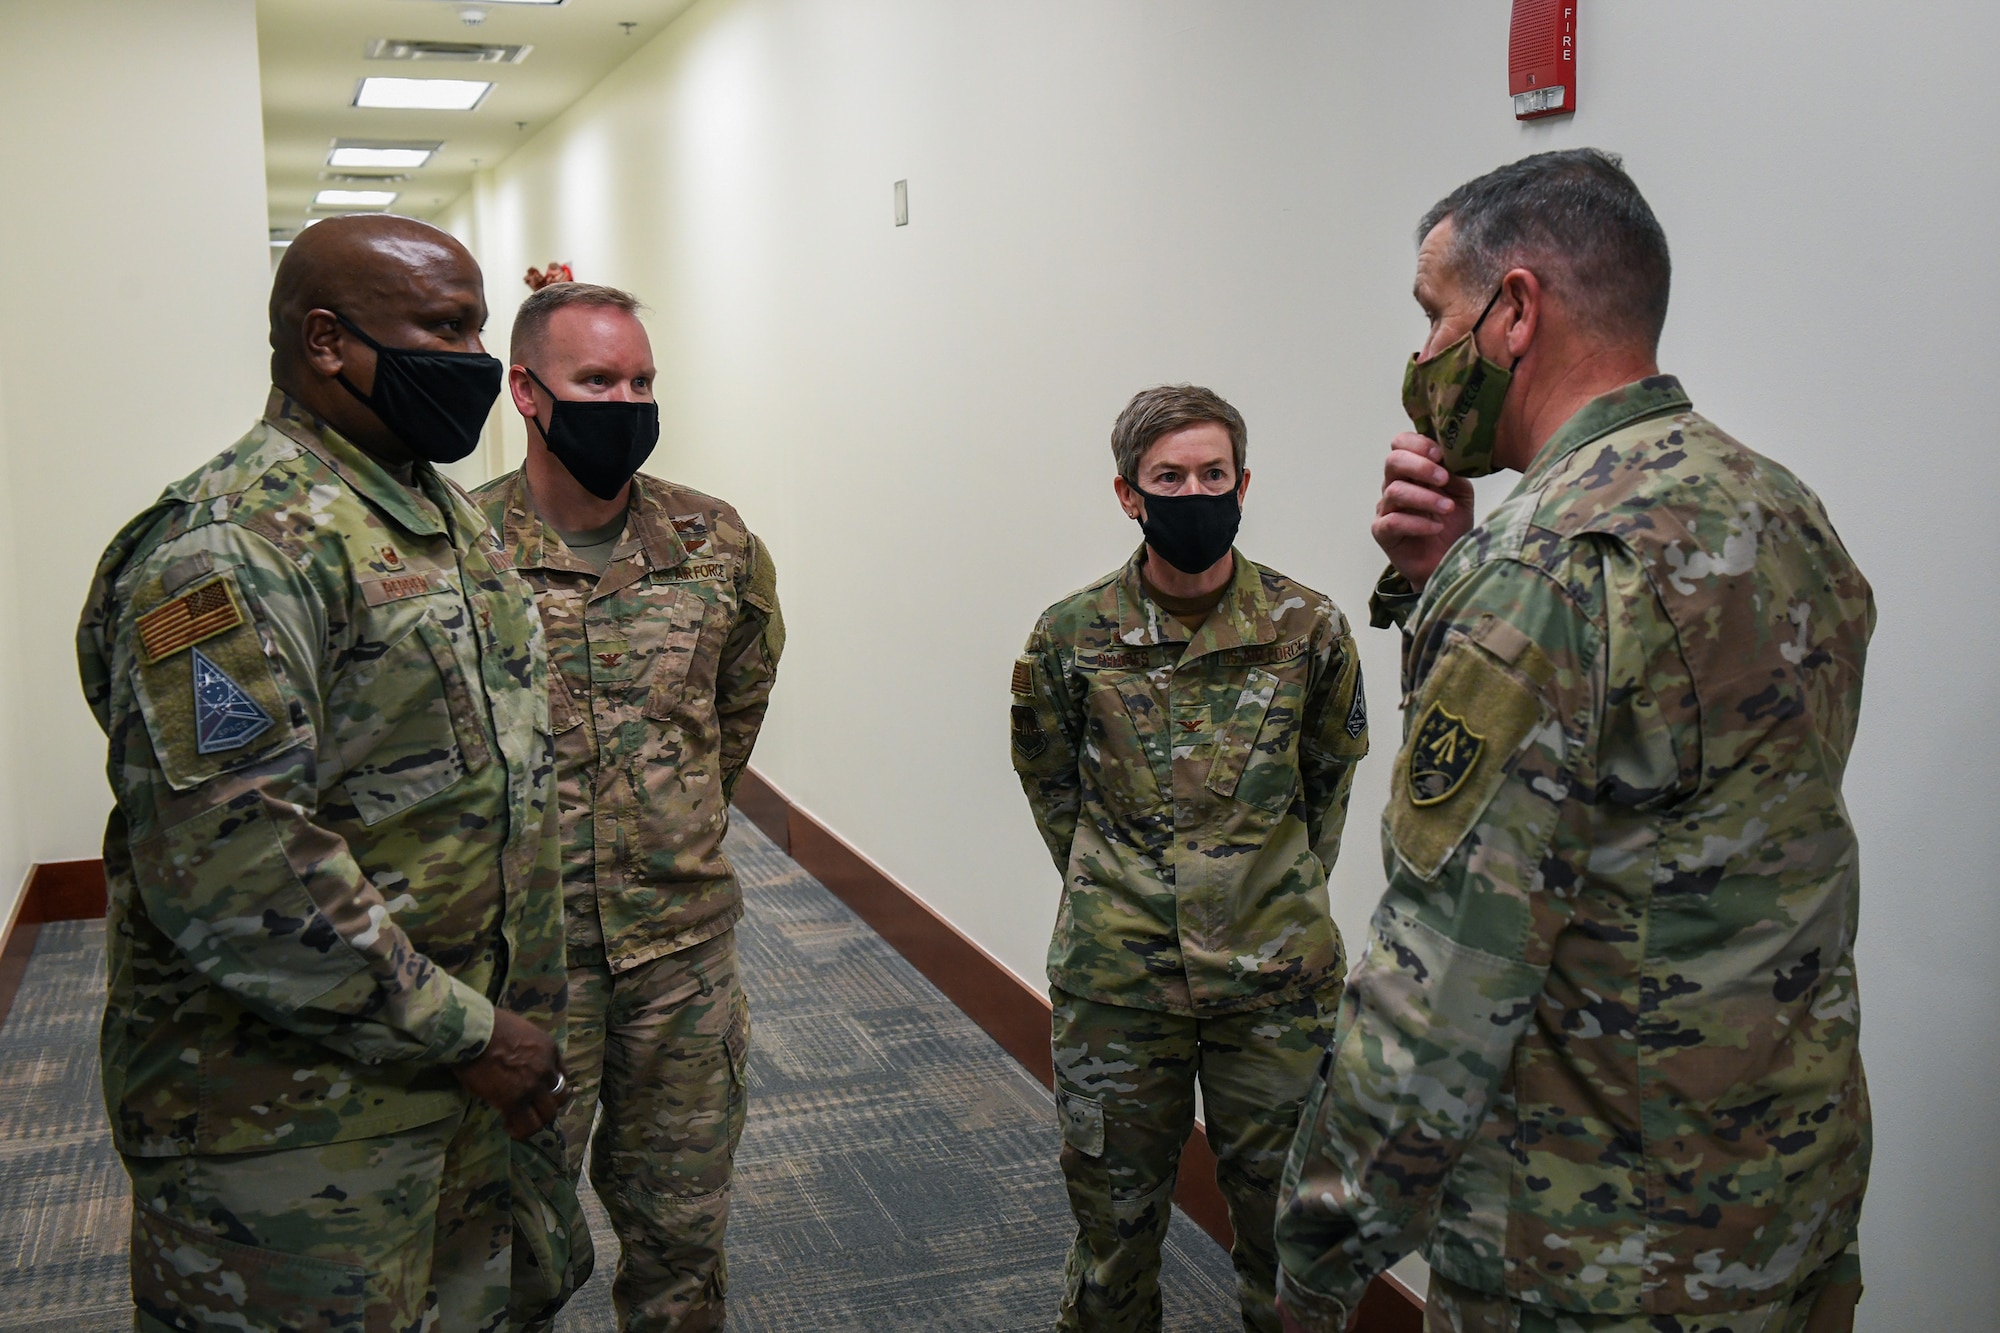 From left to right, U.S. Air Force Col. Devin Pepper, Buckley Garrison commander, U.S. Air Force Col. Brian Chellgren, 460th Mission Support Group commander, U.S. Air Force Col. Shannon Phares, 460th Medical Group commander, and U.S. Army Gen. James Dickinson, U.S. Space Command commander, are introduced following a mission brief in the Buckley Garrison headquarters building on Buckley Air Force Base, Colo., Jan. 7, 2021.